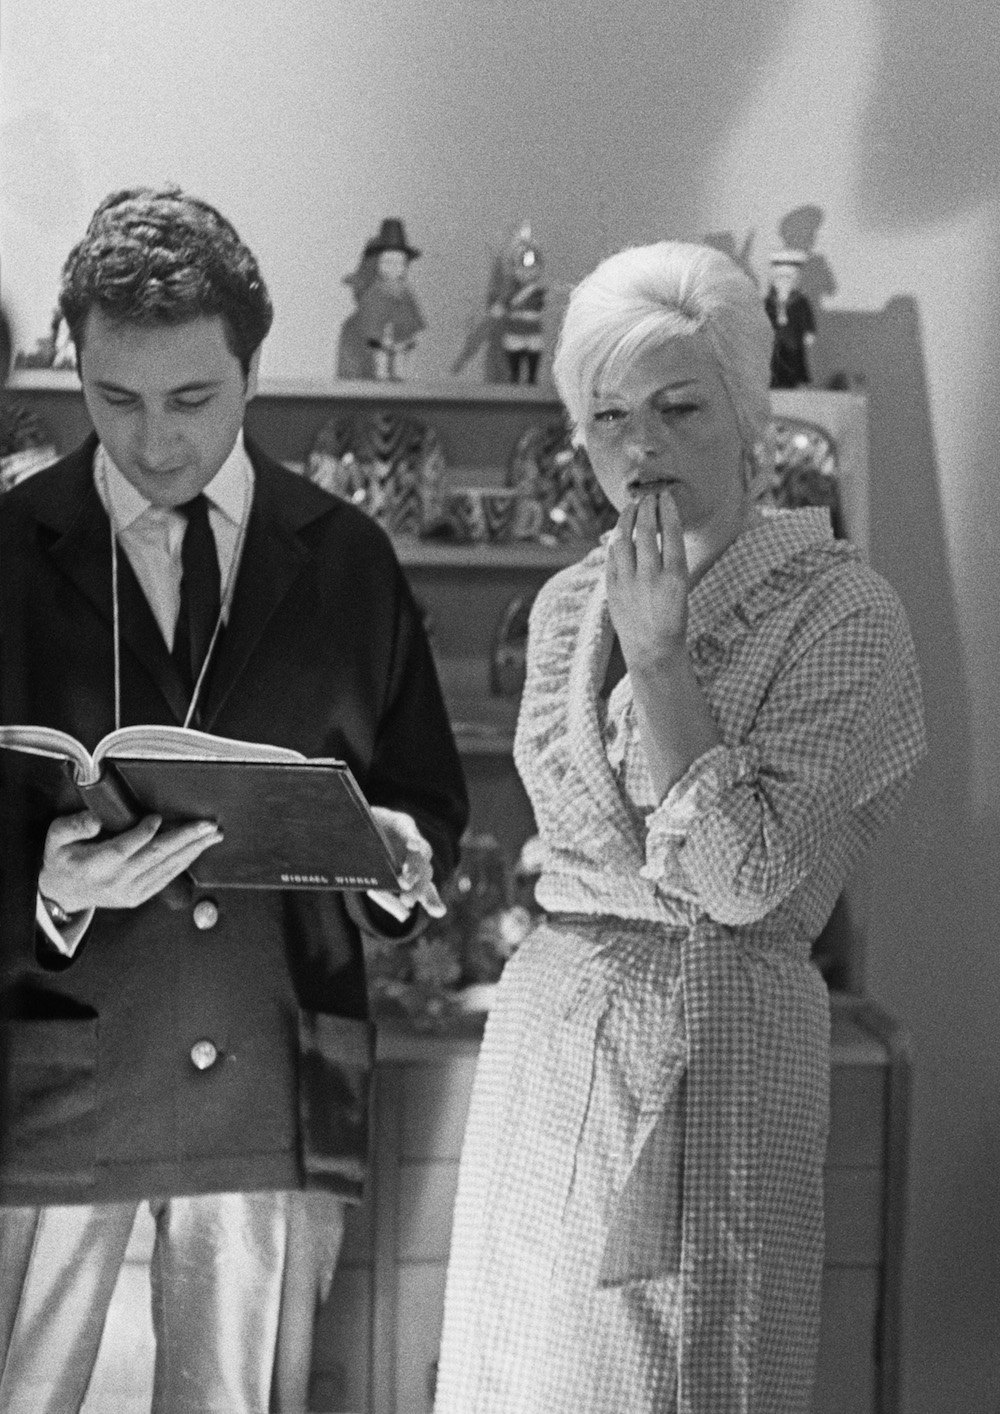 Michael Winner (1935 - 2013) directs English actress Diana Dors (1931 - 1984) in a bedroom scene for the crime drama 'West 11', London, 28th January 1963. (Photo by Norman Potter/Daily Express/Hulton Archive/Getty Images)